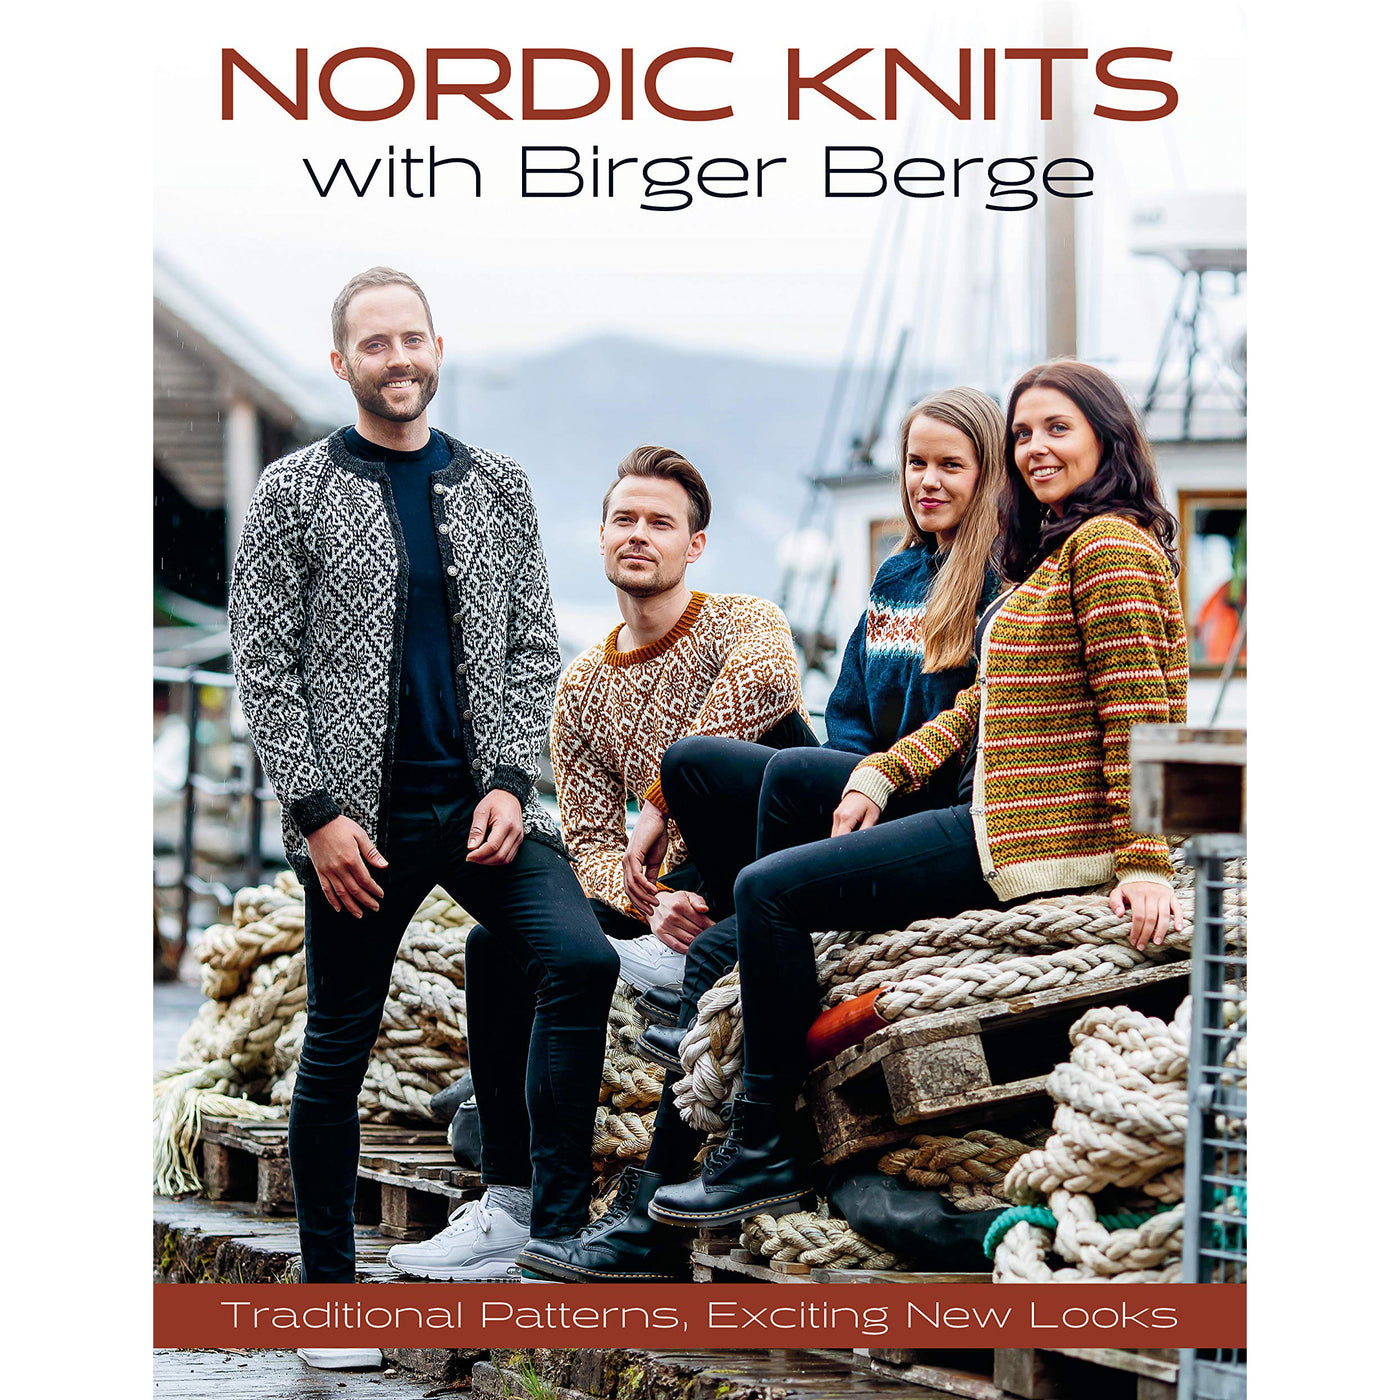 Nordic Knits with Birger Berge